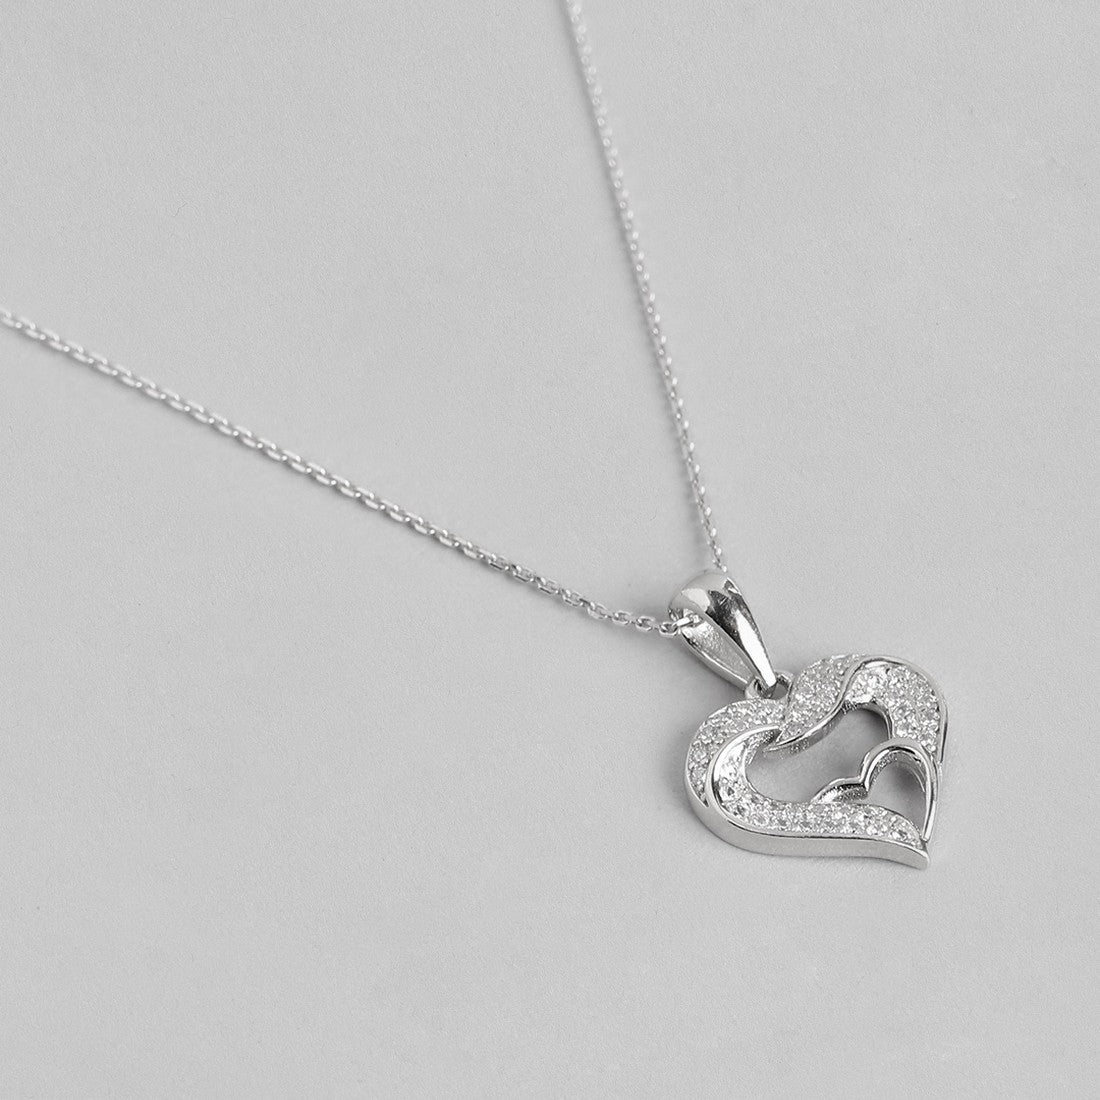 Saga of Entwined Hearts 925 Silver Jewellery Set